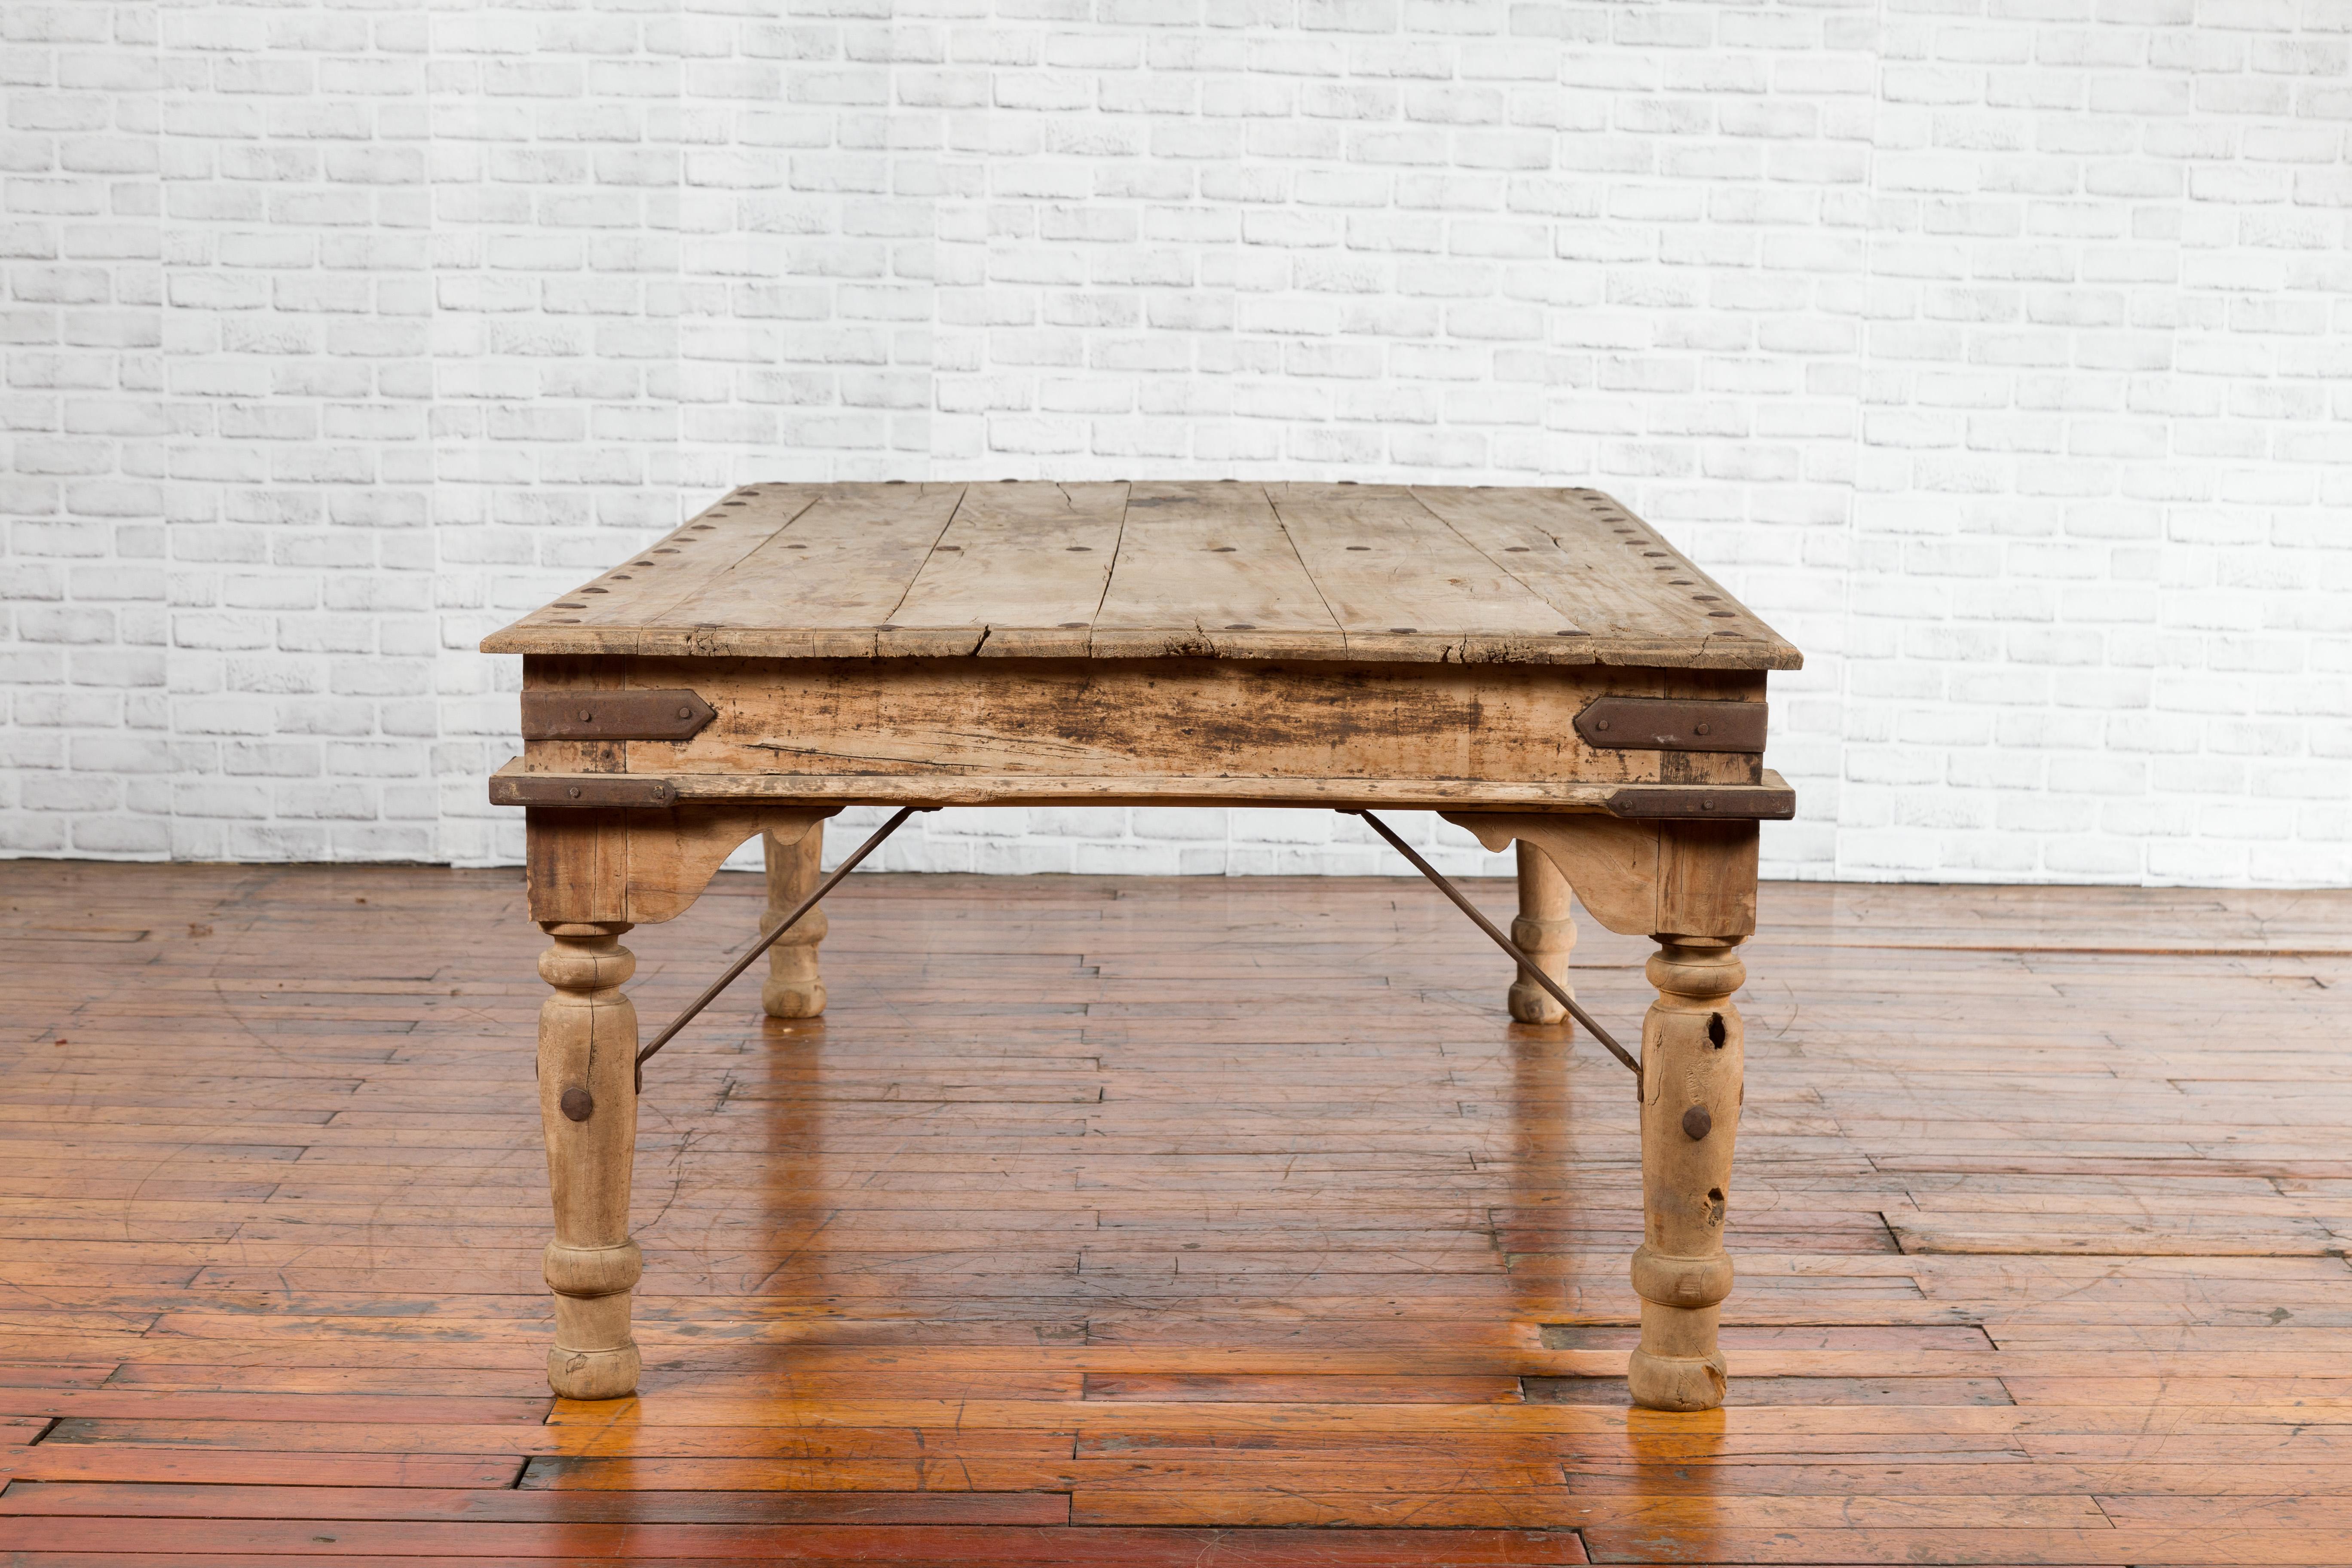 Rustic Indian Low Table with Distressed Patina, Iron Details and Baluster Legs For Sale 9